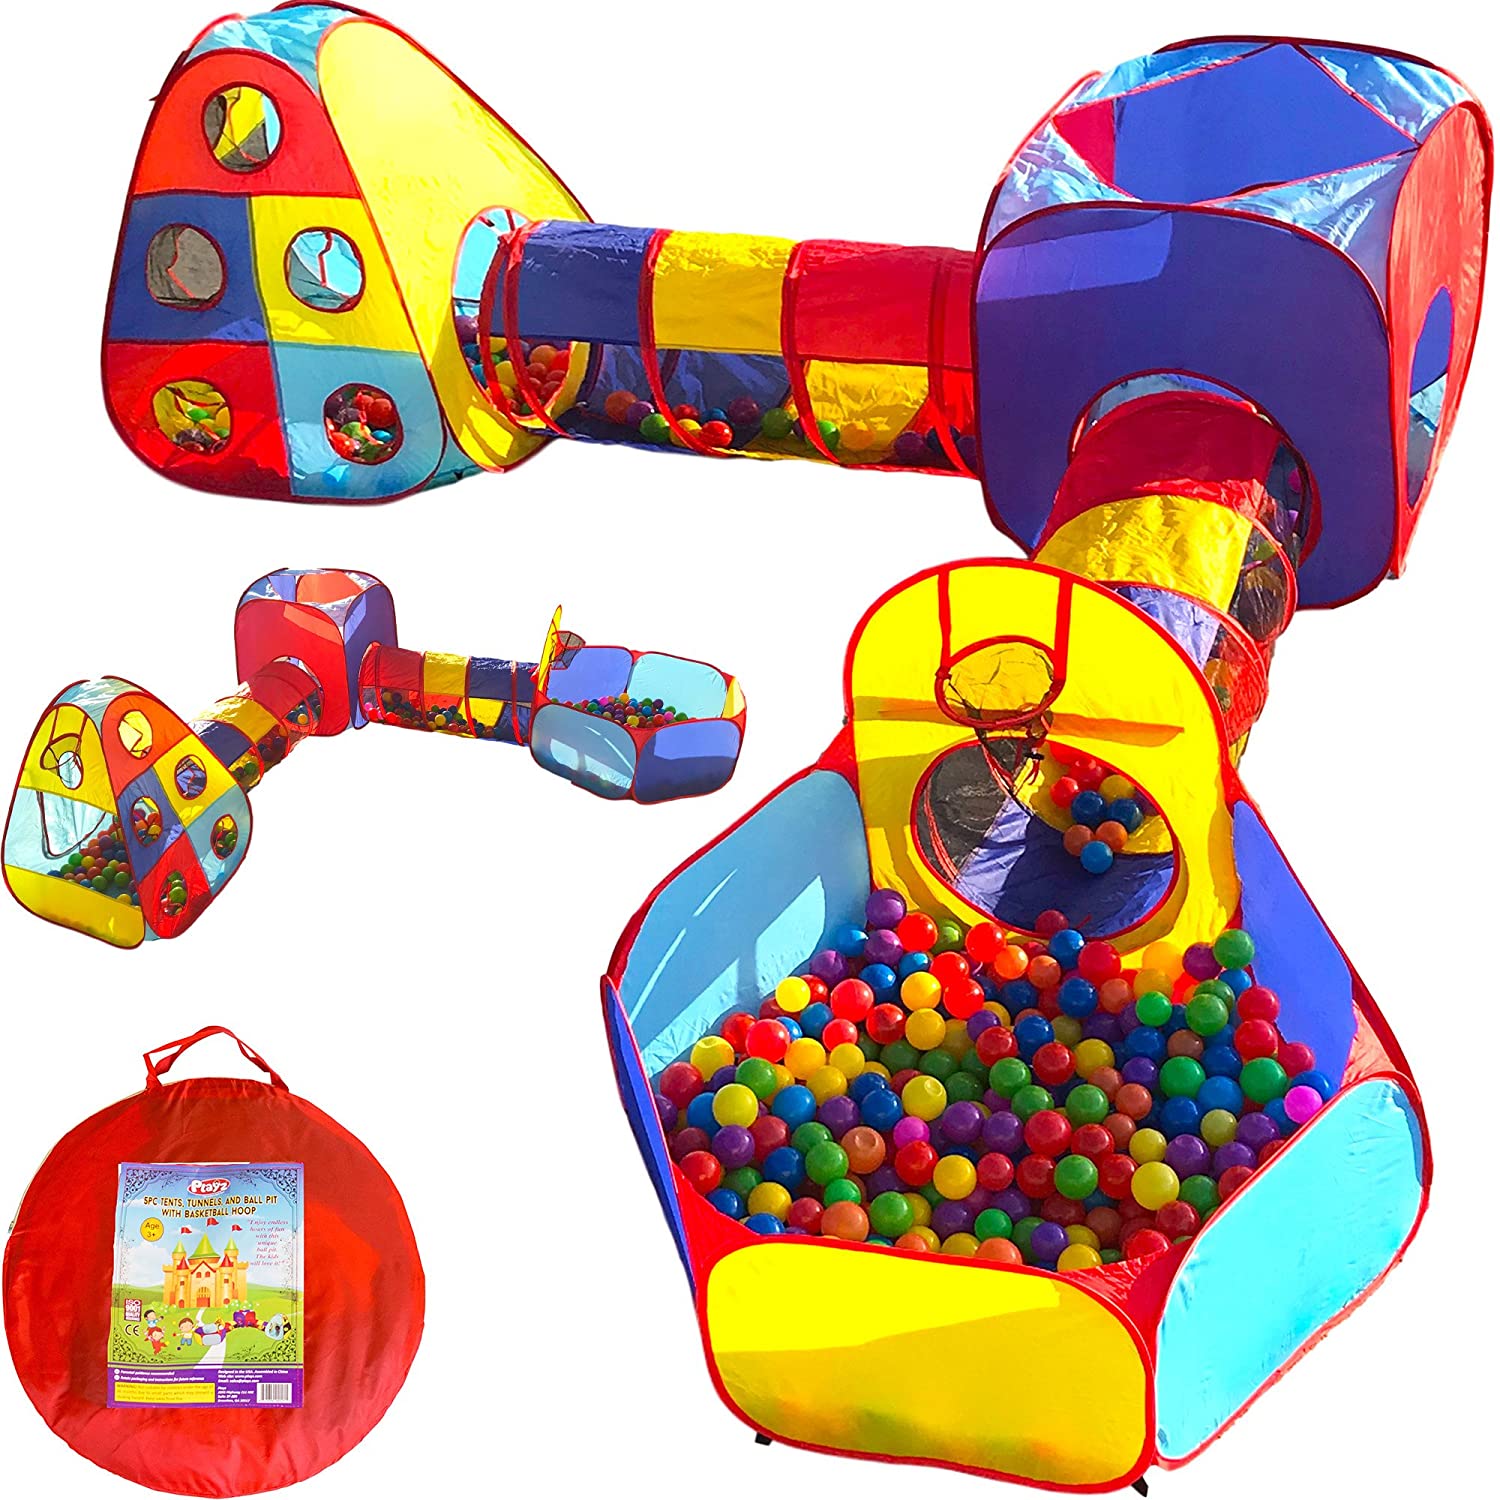 Top 9 Best Ball Pit for Kids Reviews in 2022 4